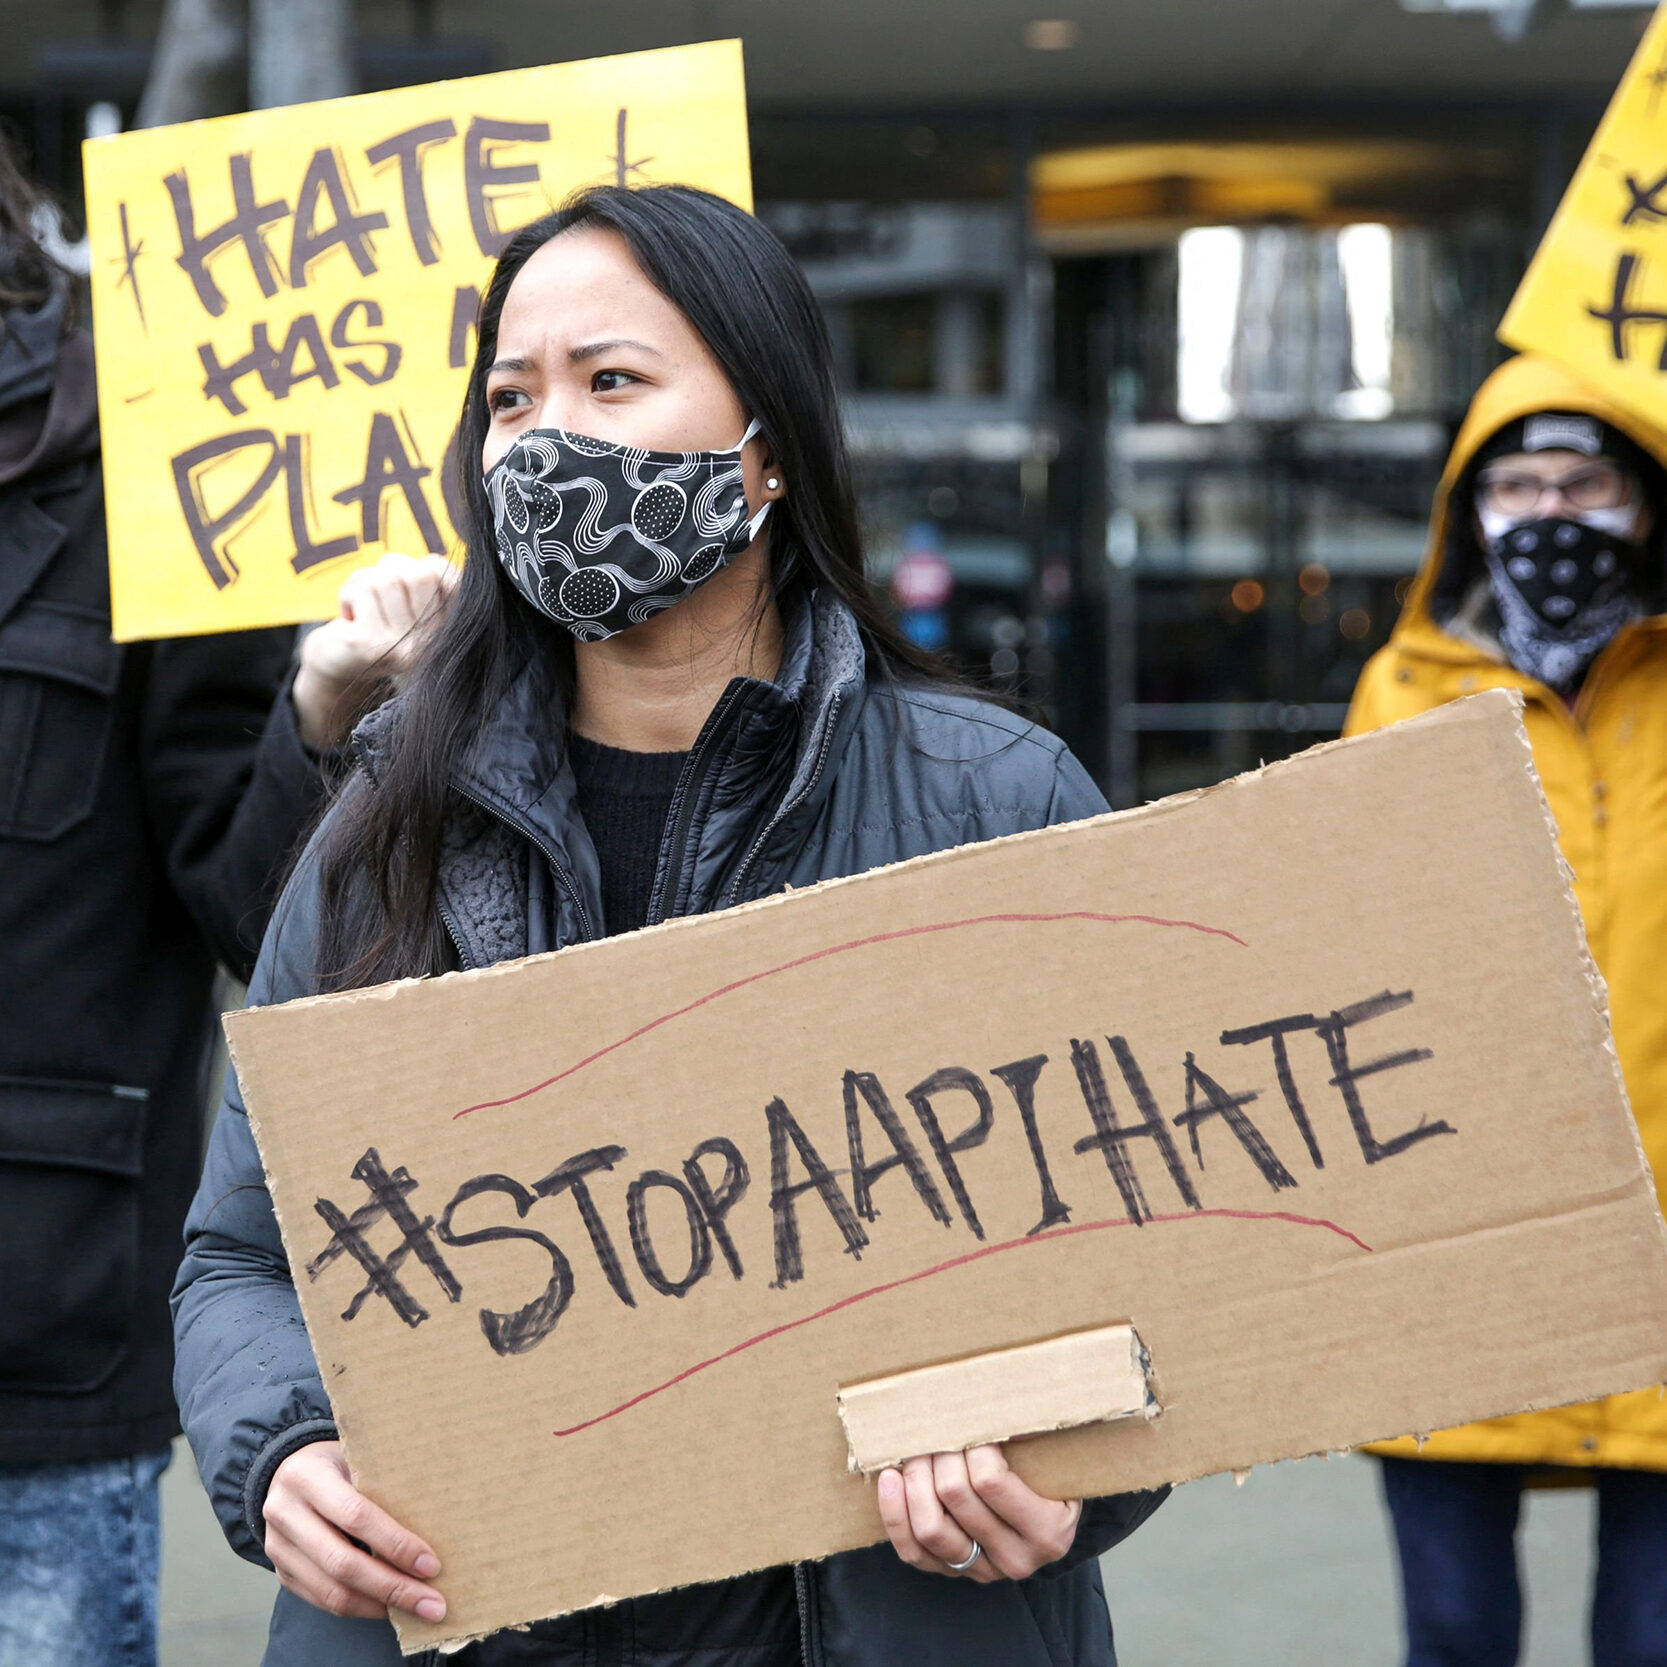 Trish Villanueva (C) of Seattle holds a sign with the hashtag "stop AAPI hate" during the We Are Not Silent rally organized by the Asian American Pacific Islander (AAPI) Coalition Against Hate and Bias in Bellevue, Washington on March 18, 2021. - The shooting rampage in Atlanta by a 21-year-old white man that left six women of Asian origin dead has laid bare the fears of an Asian-American community on edge over a spike in hate crimes because of the coronavirus pandemic. (Photo by Jason Redmond / AFP) (Photo by JASON REDMOND/AFP via Getty Images)